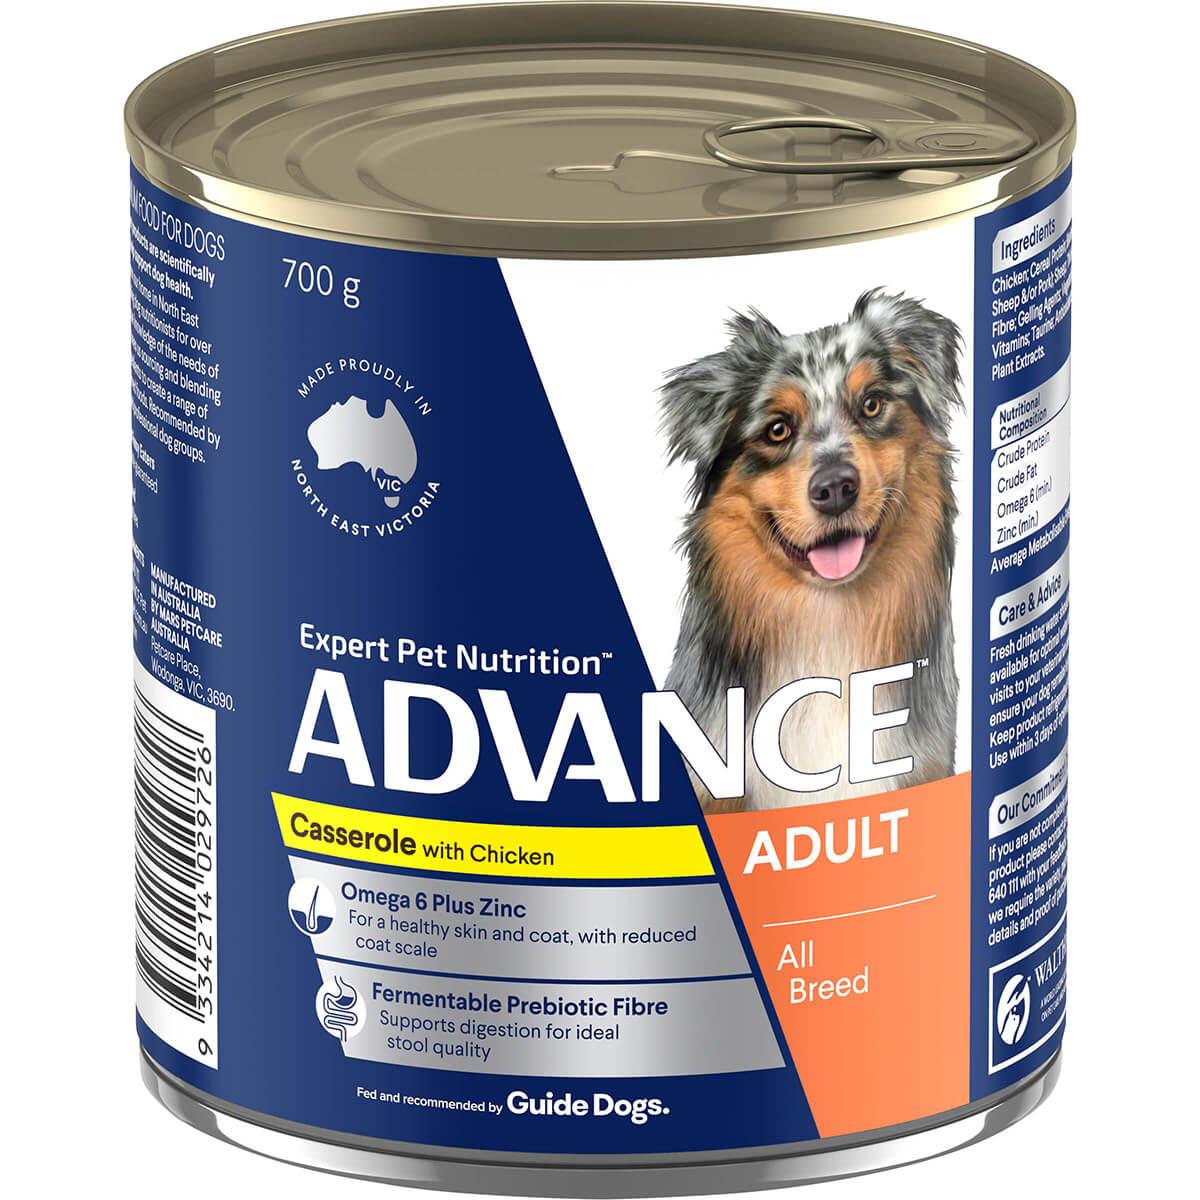 Advance Adult Casserole with Chicken Wet Dog Food